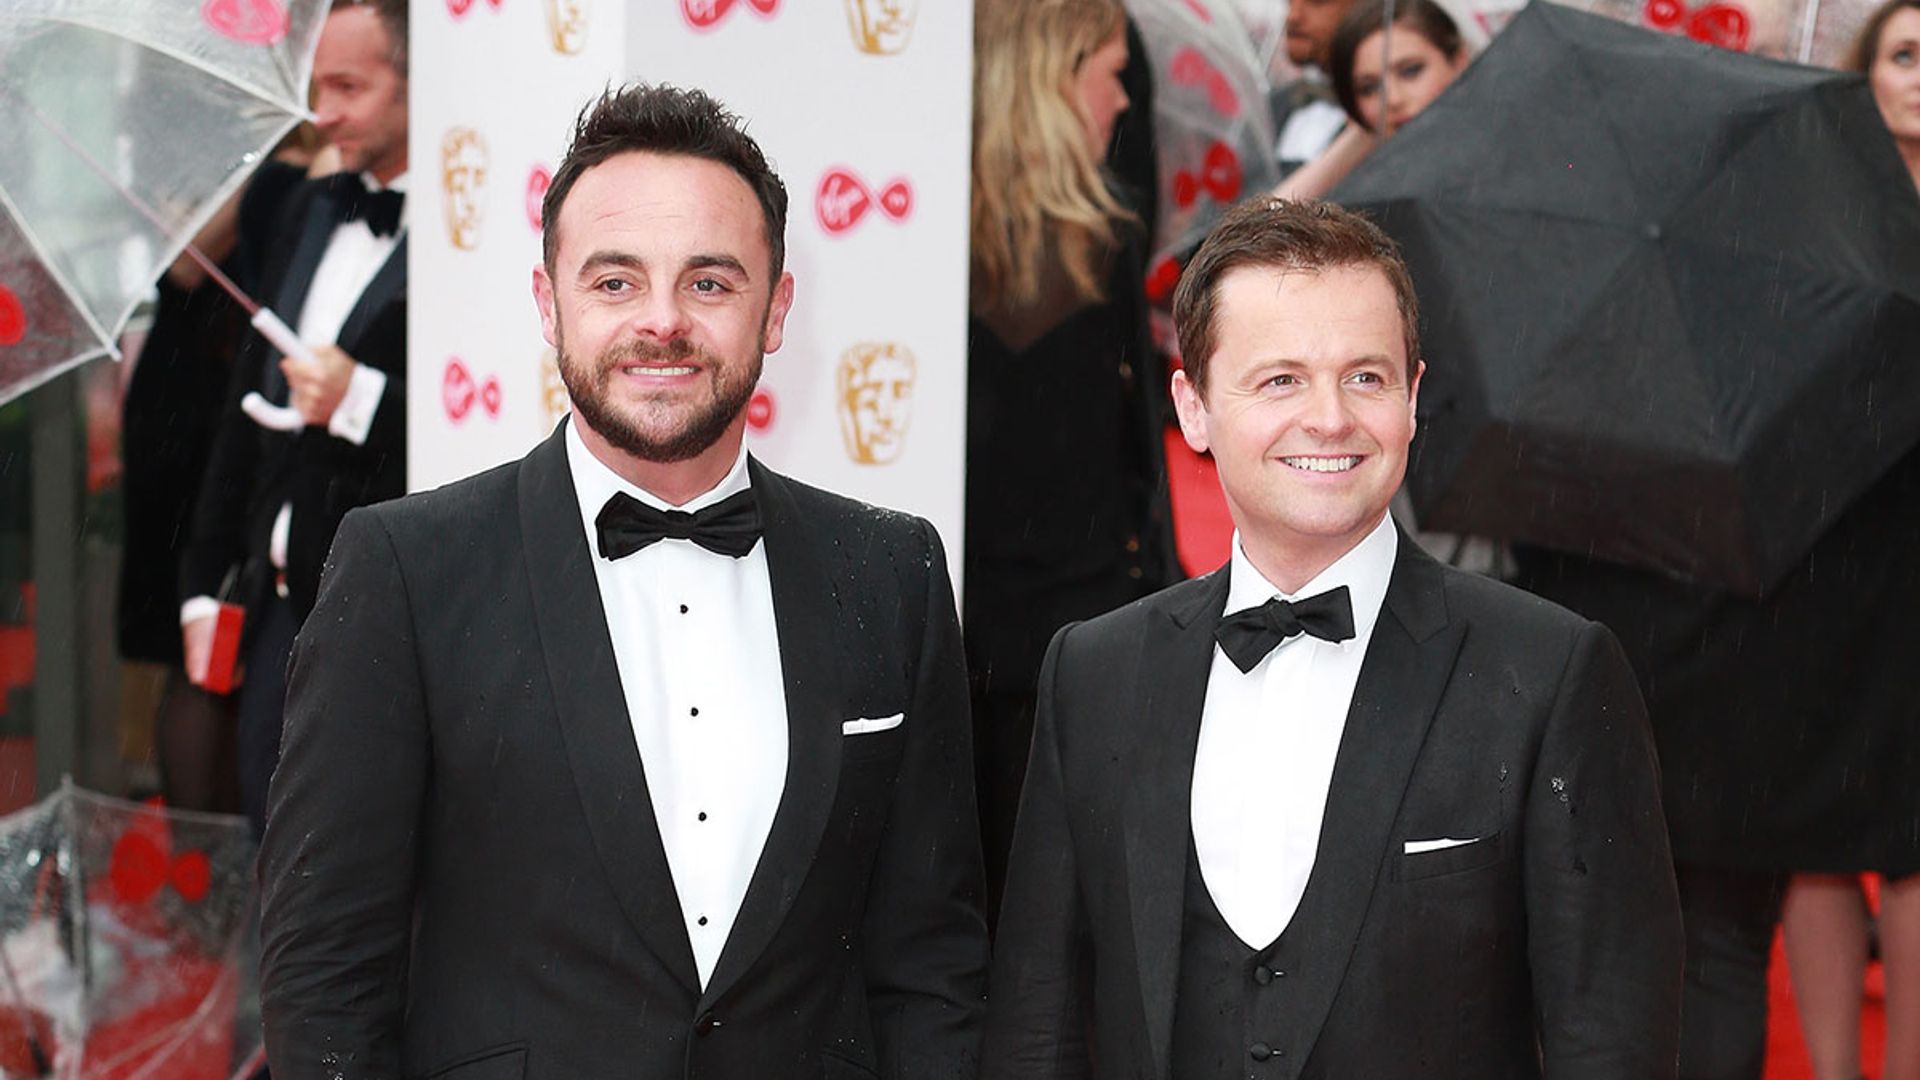 Ant and Dec announce some exciting news after incredible Britain's Got Talent audition